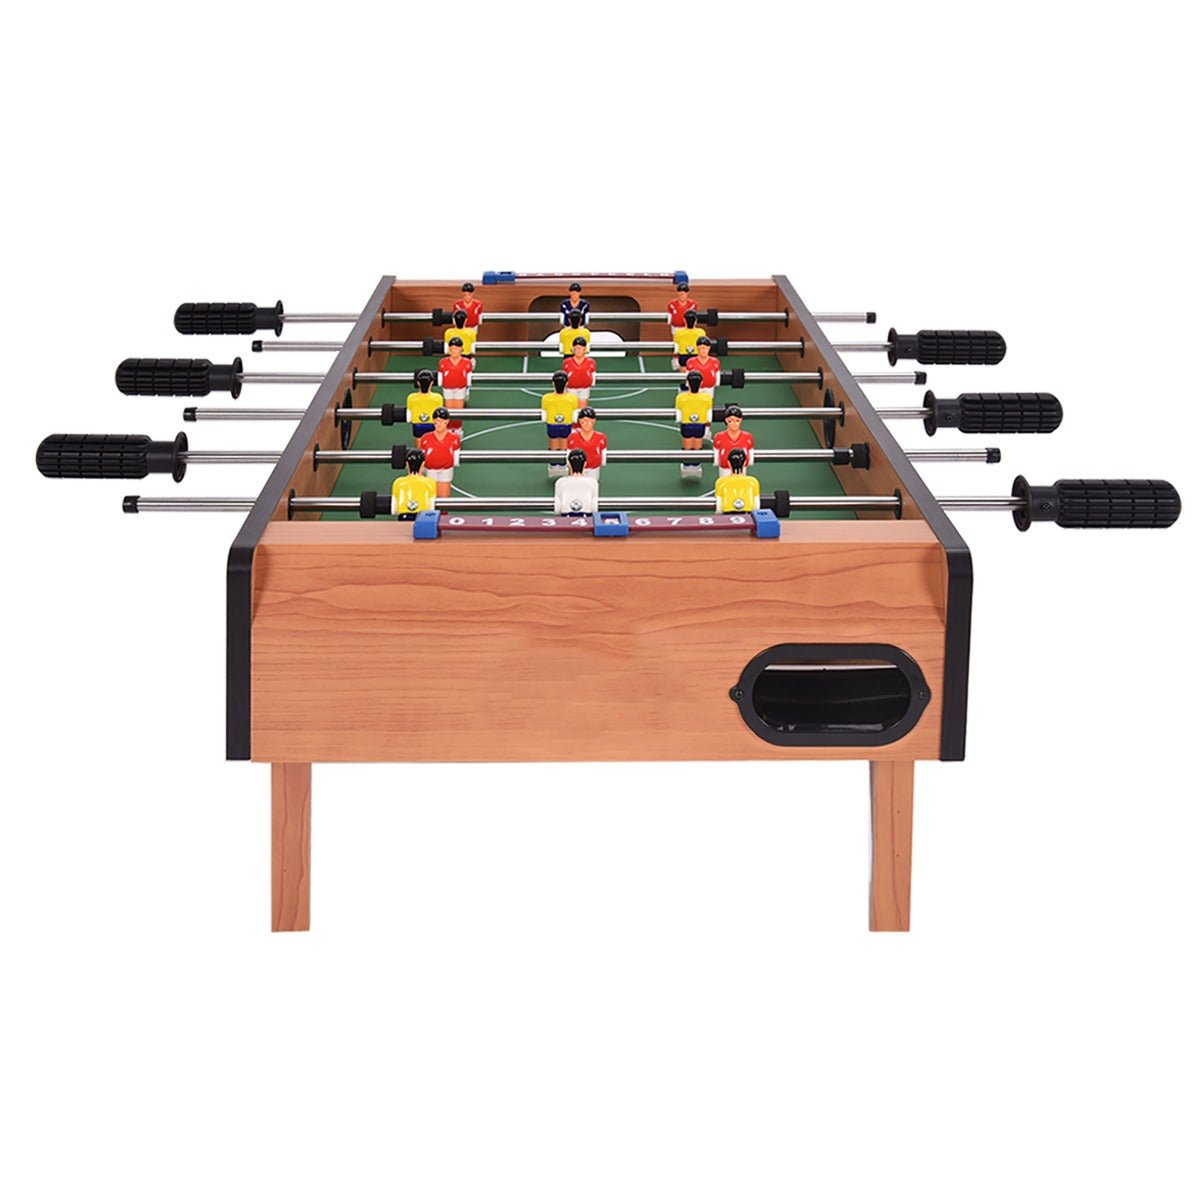 Get Your Game On - Shop Tabletop Foosball Now!